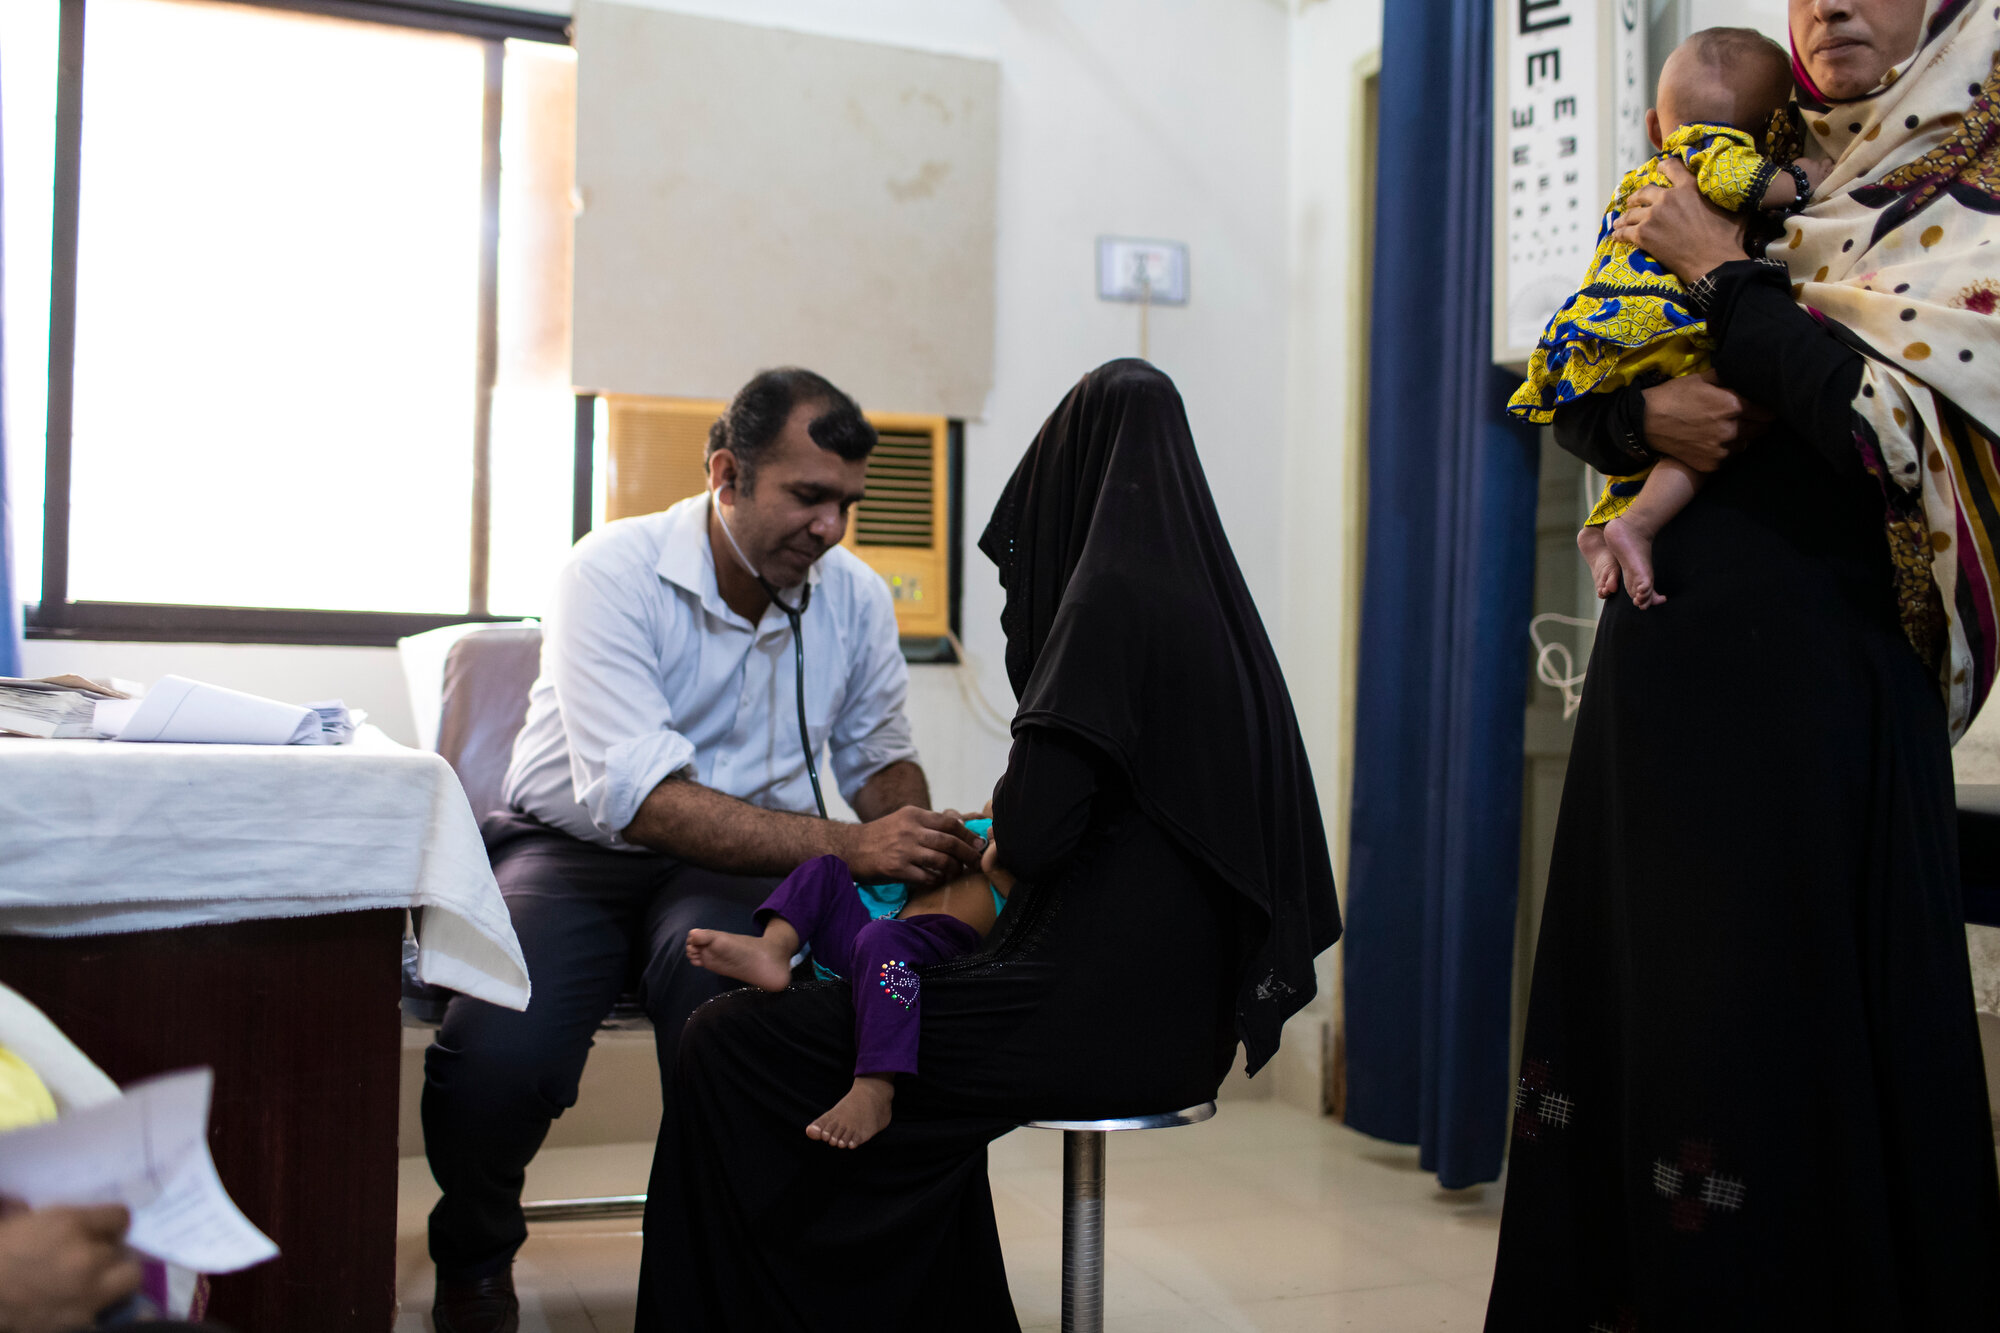  Dr. Zulfiqar Ali, a pediatrician attends to a mother and her child at Government Taluka Hospital. Dr. Ali sees roughly 400 patients per day and shared that the hospital is severely understaffed. Oct 24, 2019  